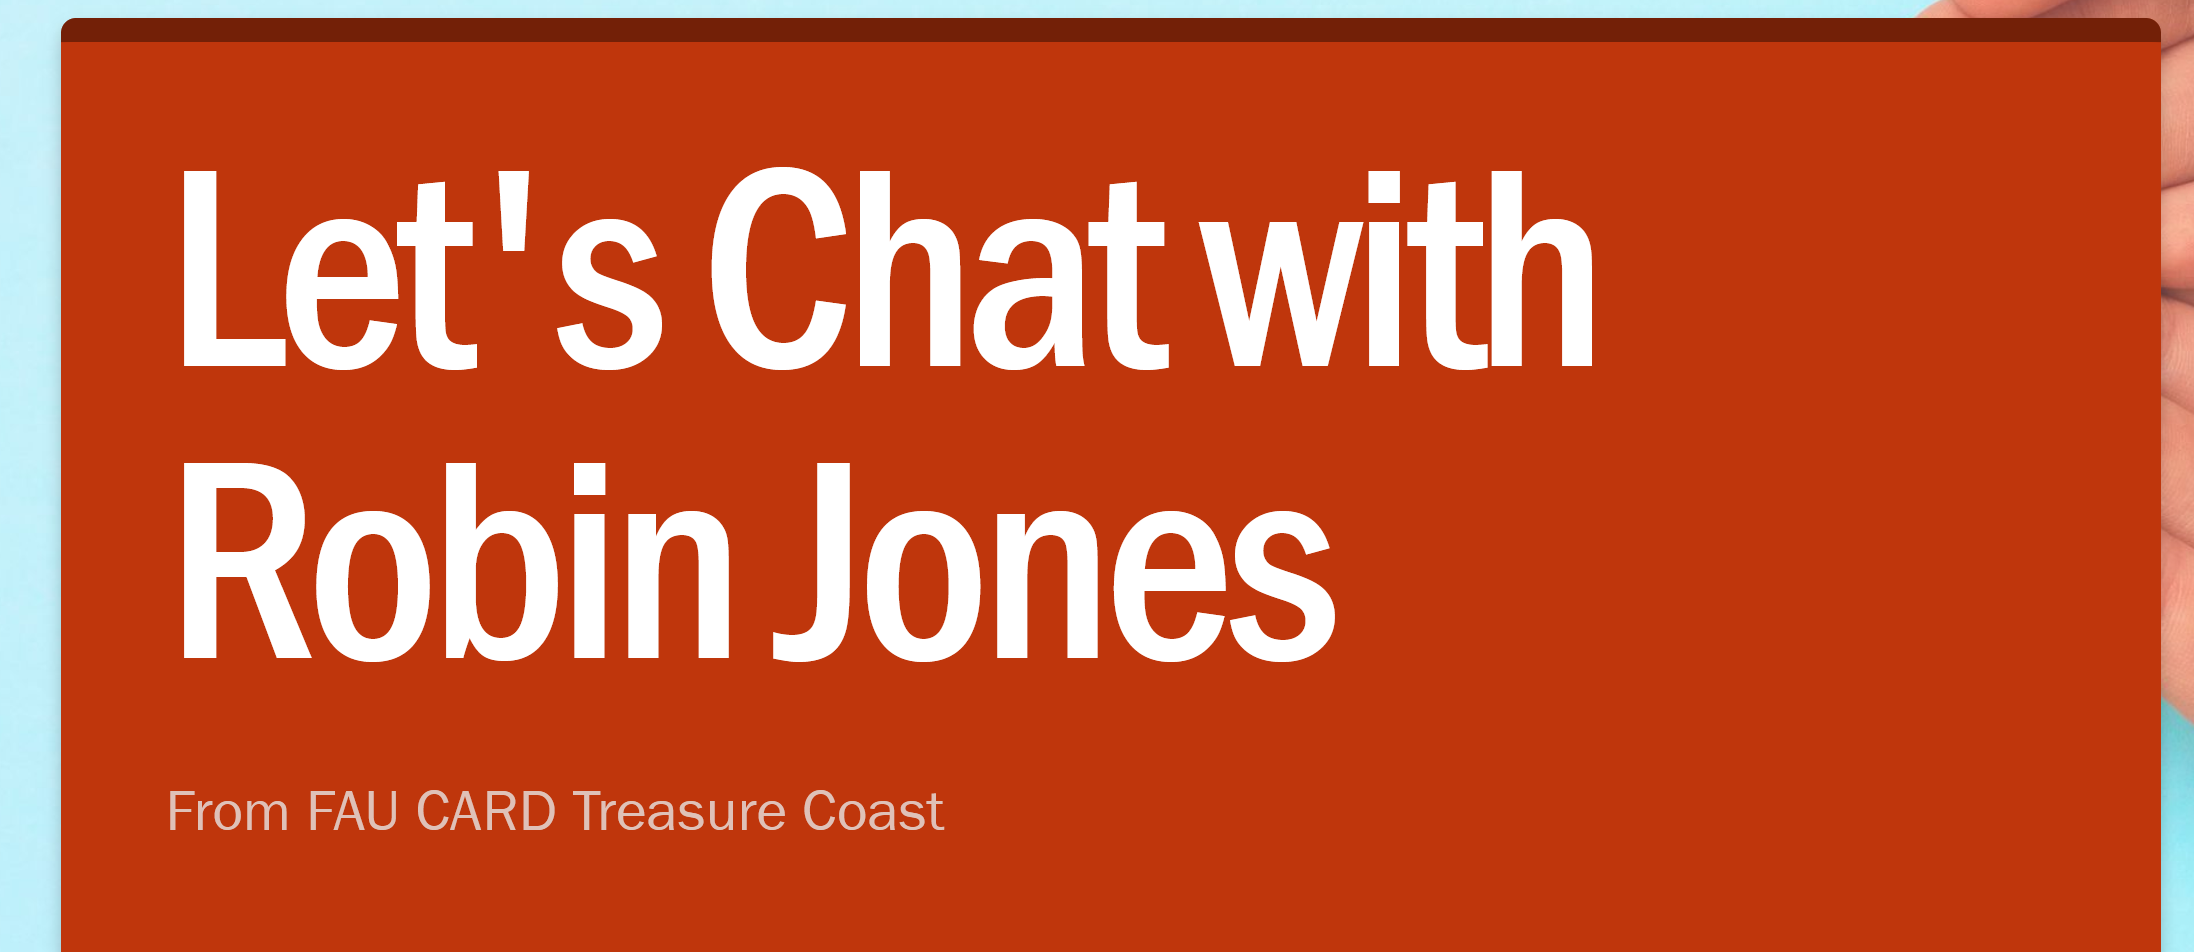 Let's Chat with Robin Jones